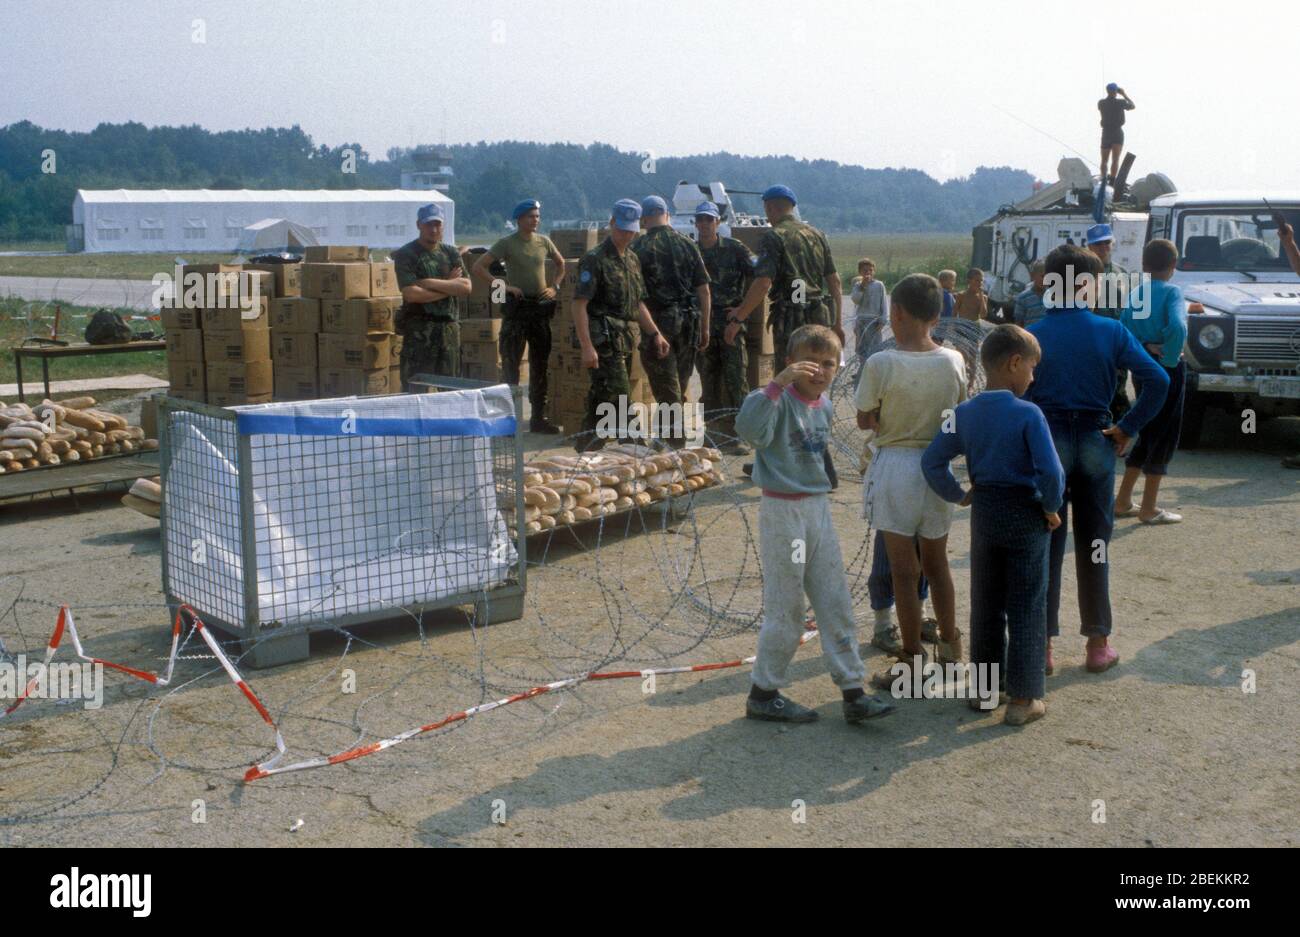 1995 Tuzla, Bosnia - Tuzla airfield temporary UN refugee camp for Bosnian Muslims fleeing the Srebrenica Massacre during the Bosnian war, pictured bread being supplied by UN soldiers Stock Photo